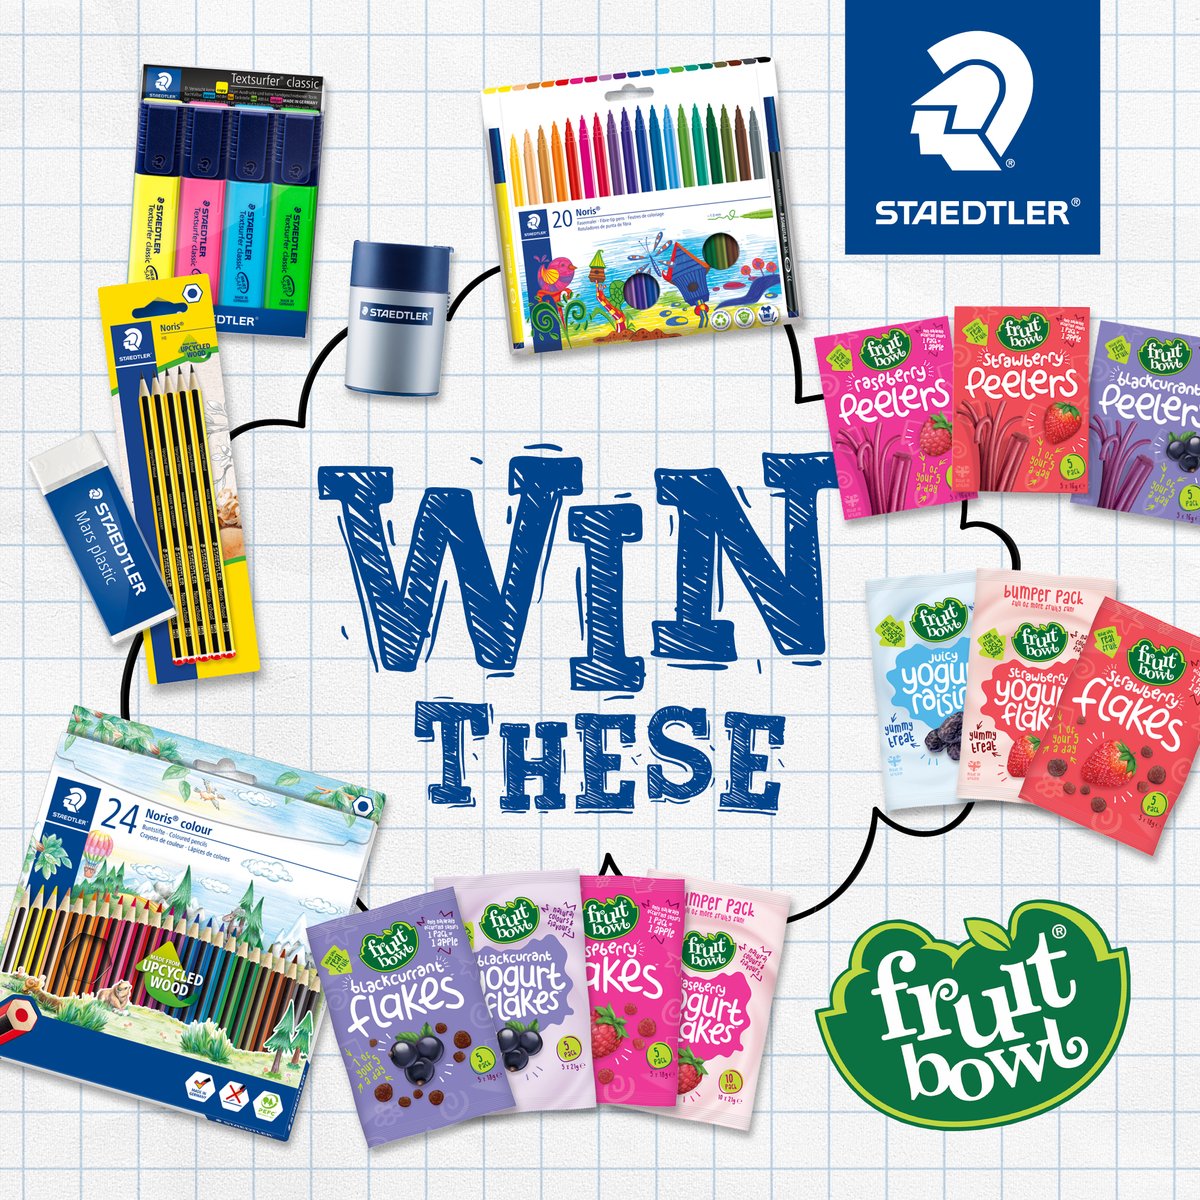 We've teamed up with @STAEMars to give 3 LUCKY WINNERS the chance to win this super bundle of STAEDTLER stationery and Fruit Bowl goodies in time for Back To School! ✏️🍎 For a chance to win: ✏️ Follow @FruitBowlFamily and @STAEMars ✏️ Like this post ✏️ Tag a friend!